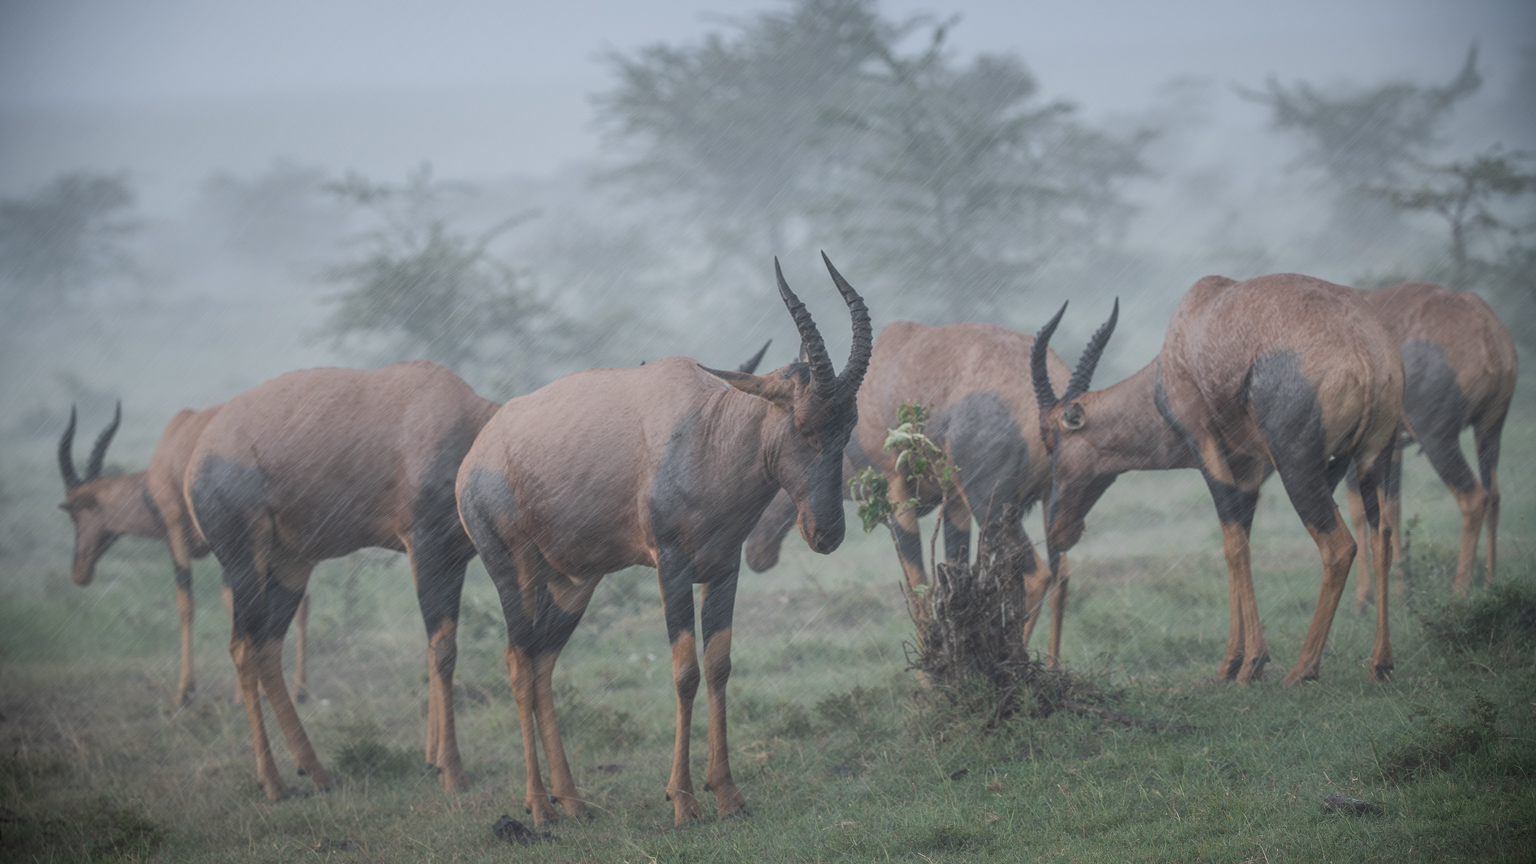 Group of Topi standing in pouring rain in Masai mara looking wet and miserable